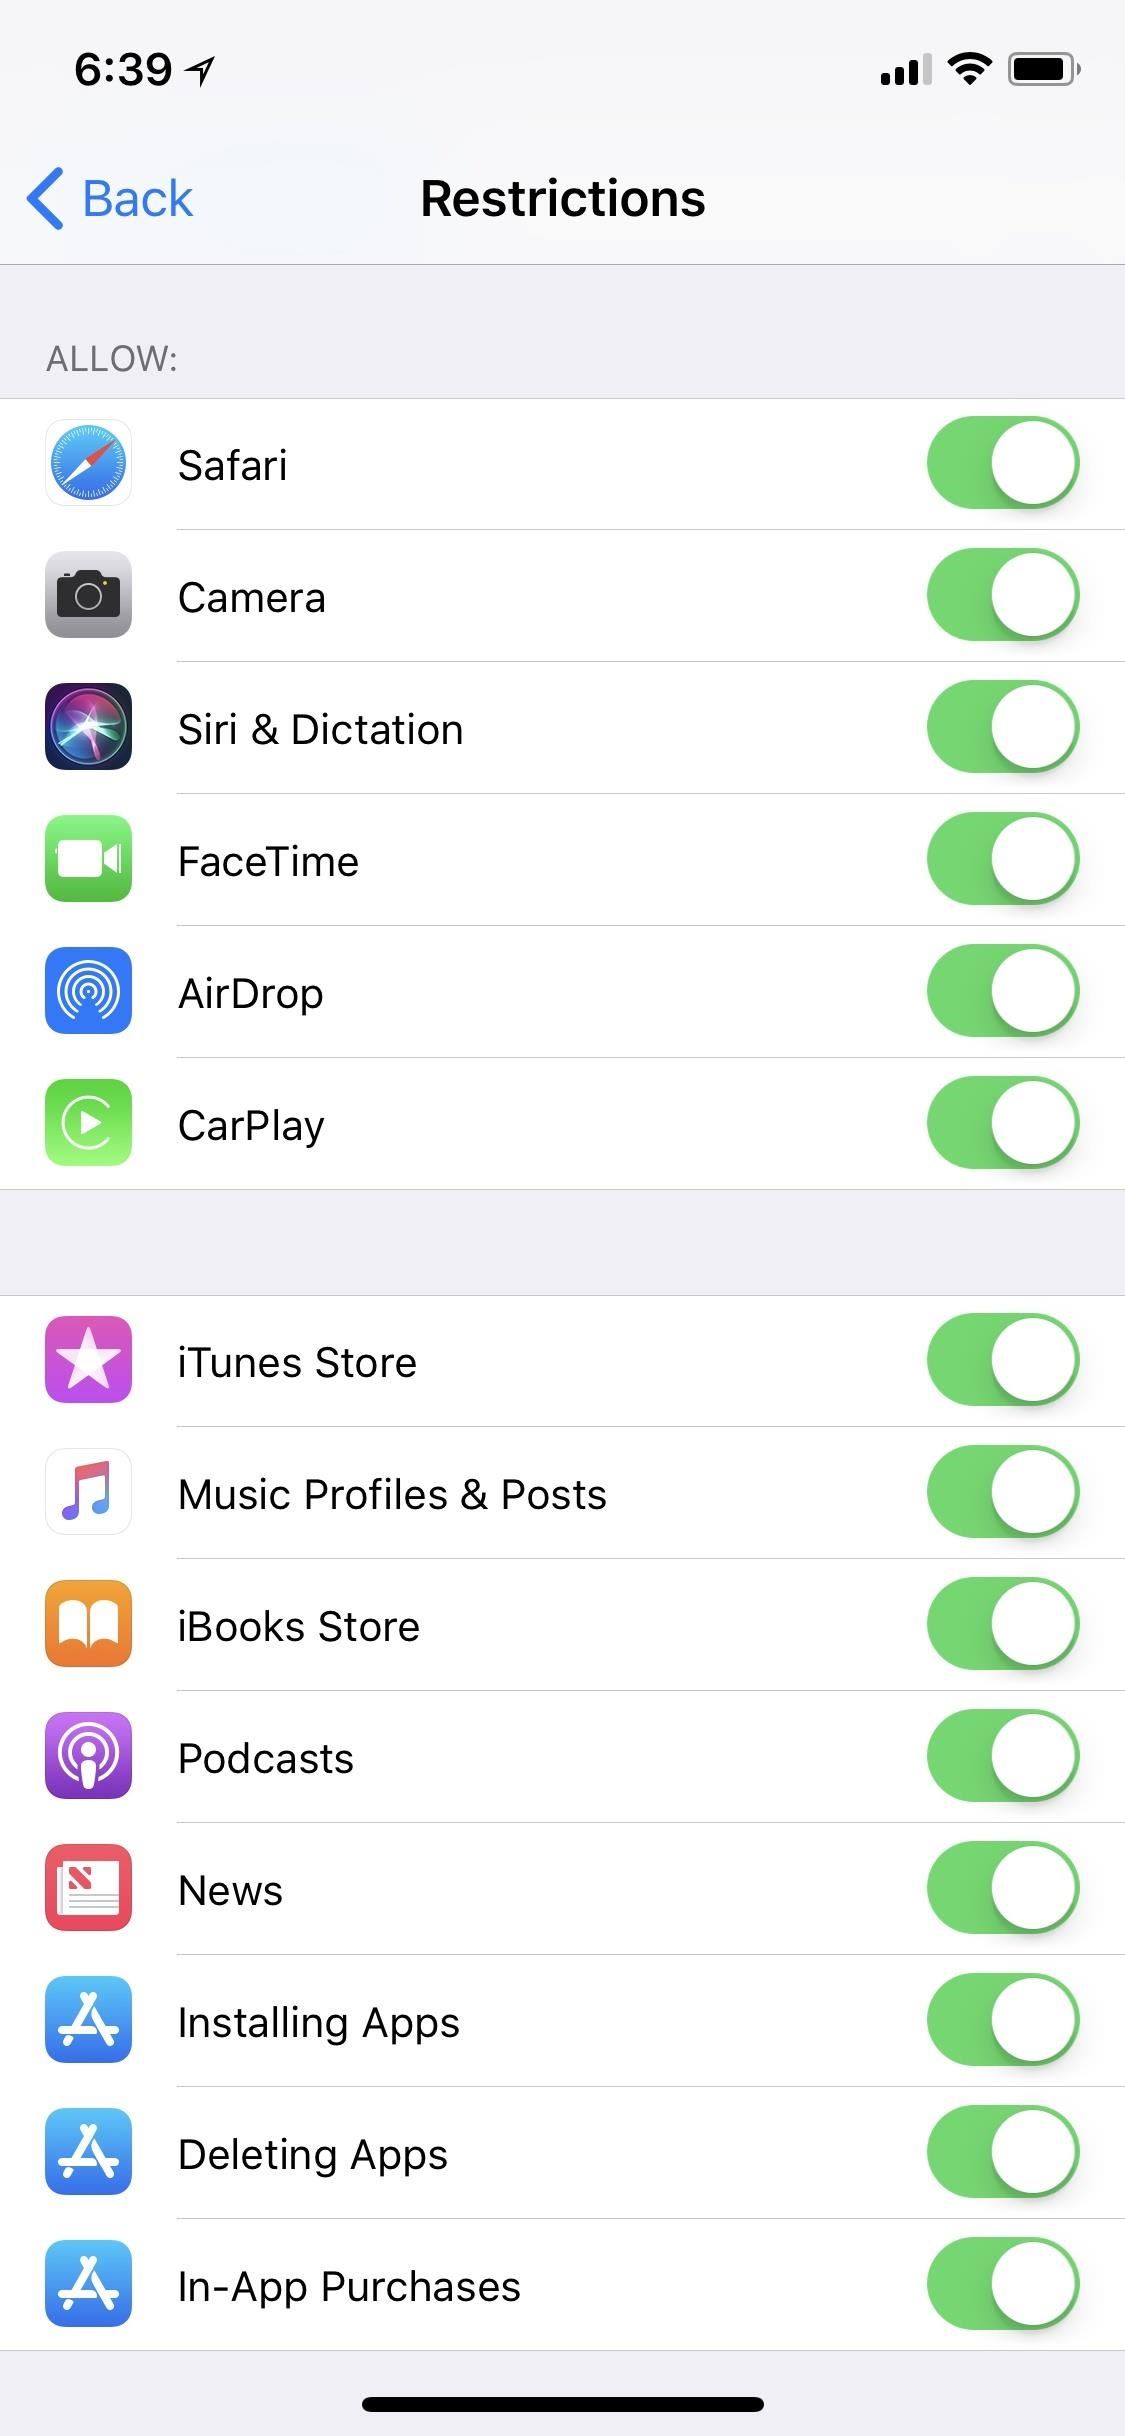 How to Hide or Restrict Apps, Features, Content & Settings on an iPhone